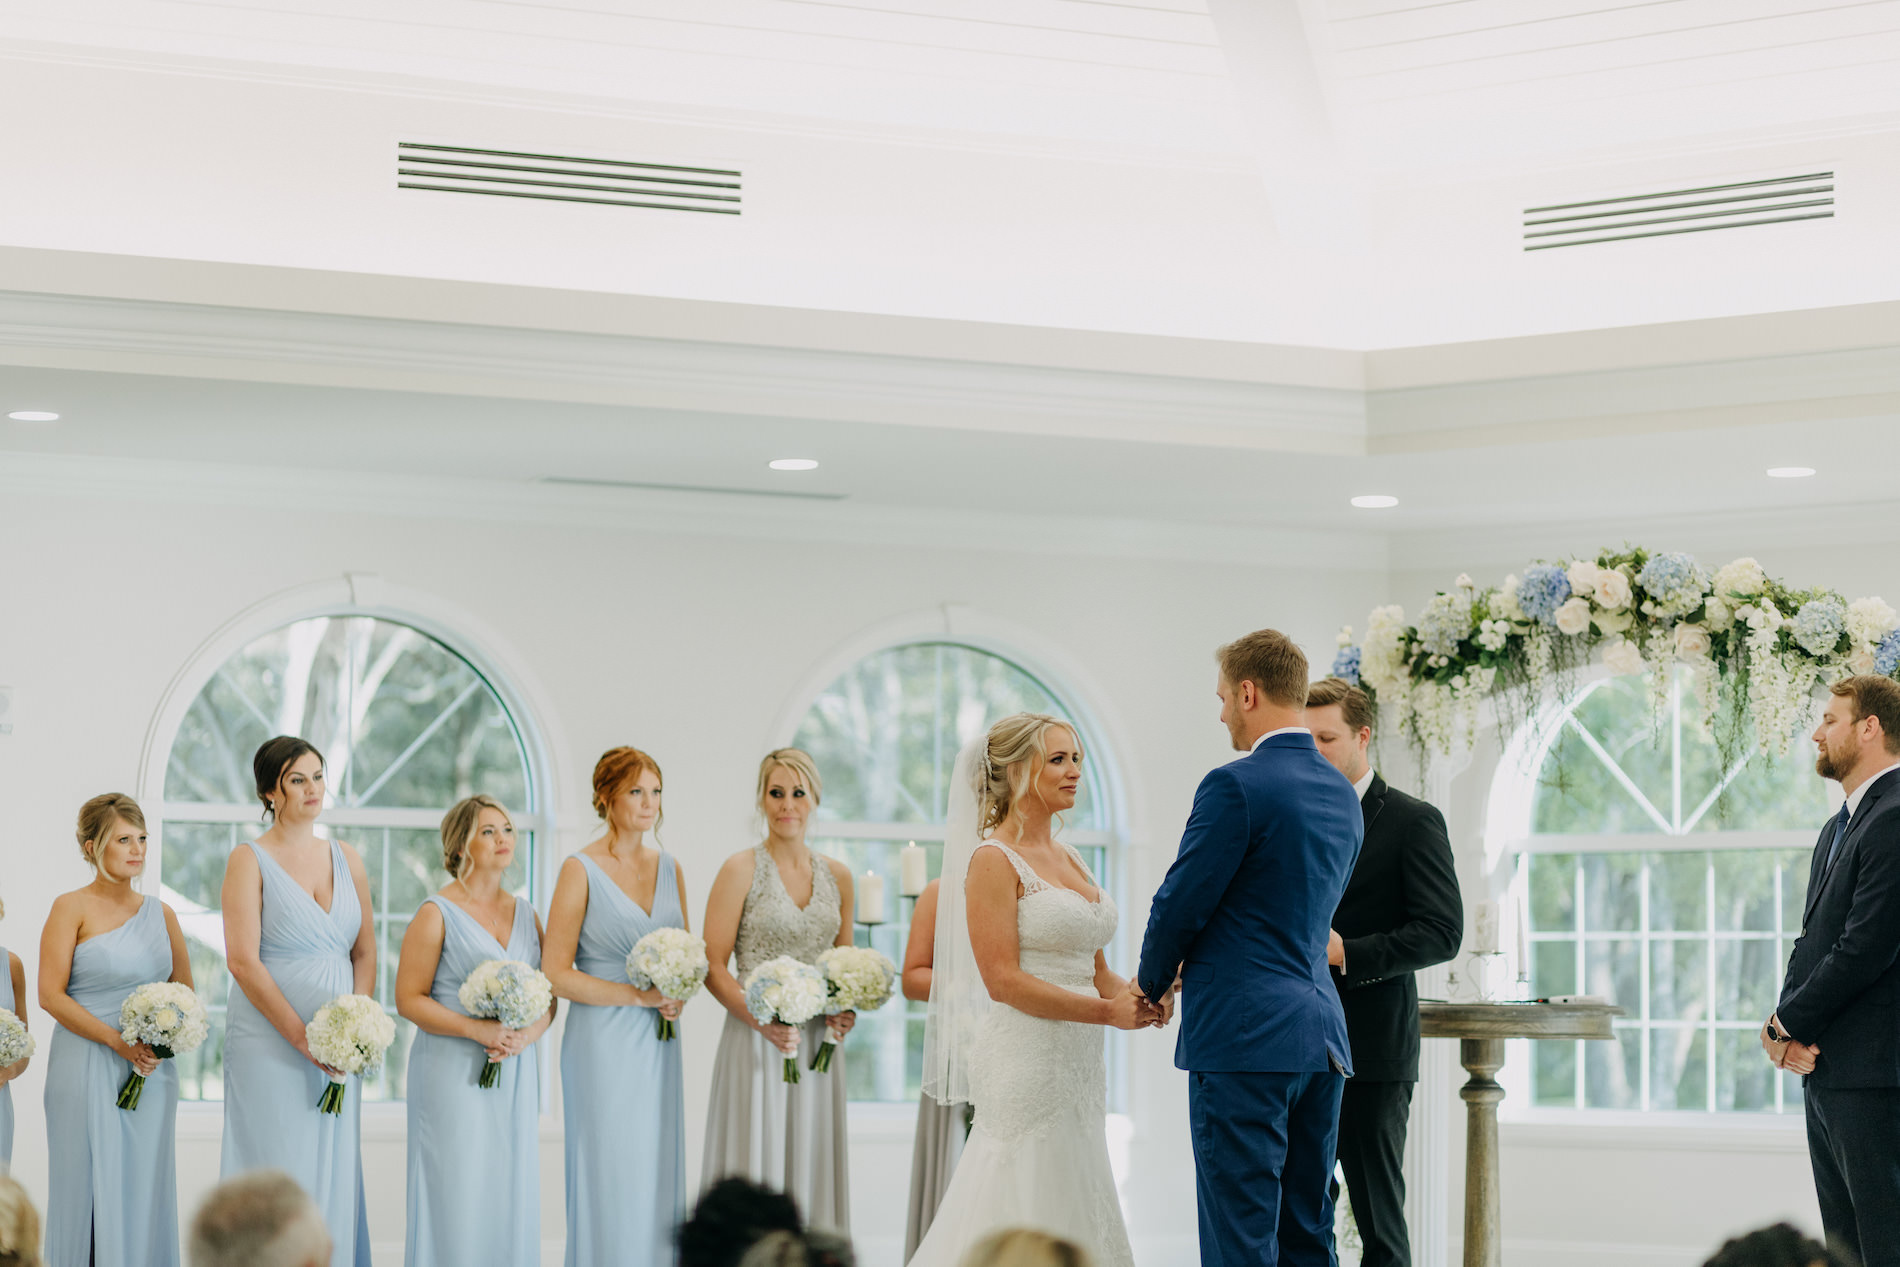 Florida Bride and Groom Exchanging Vows During Traditional Church Wedding Ceremony Portrait Under Greenery and White and Powder Blue Floral Arch | Tampa Wedding Venue Harborside Chapel